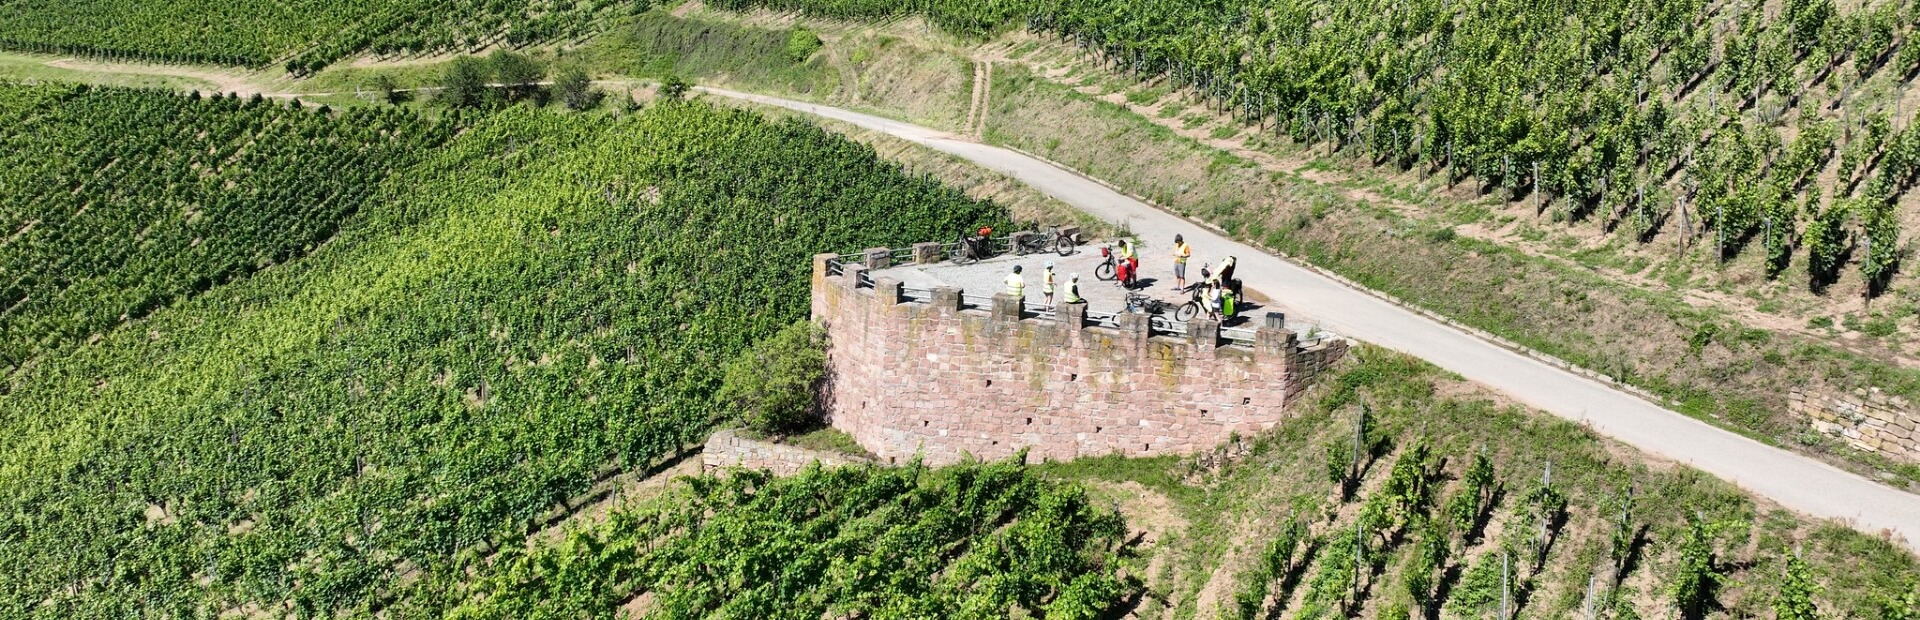 During your stay at the Médiéval campsite, go and discover the many cycling routes in Alsace